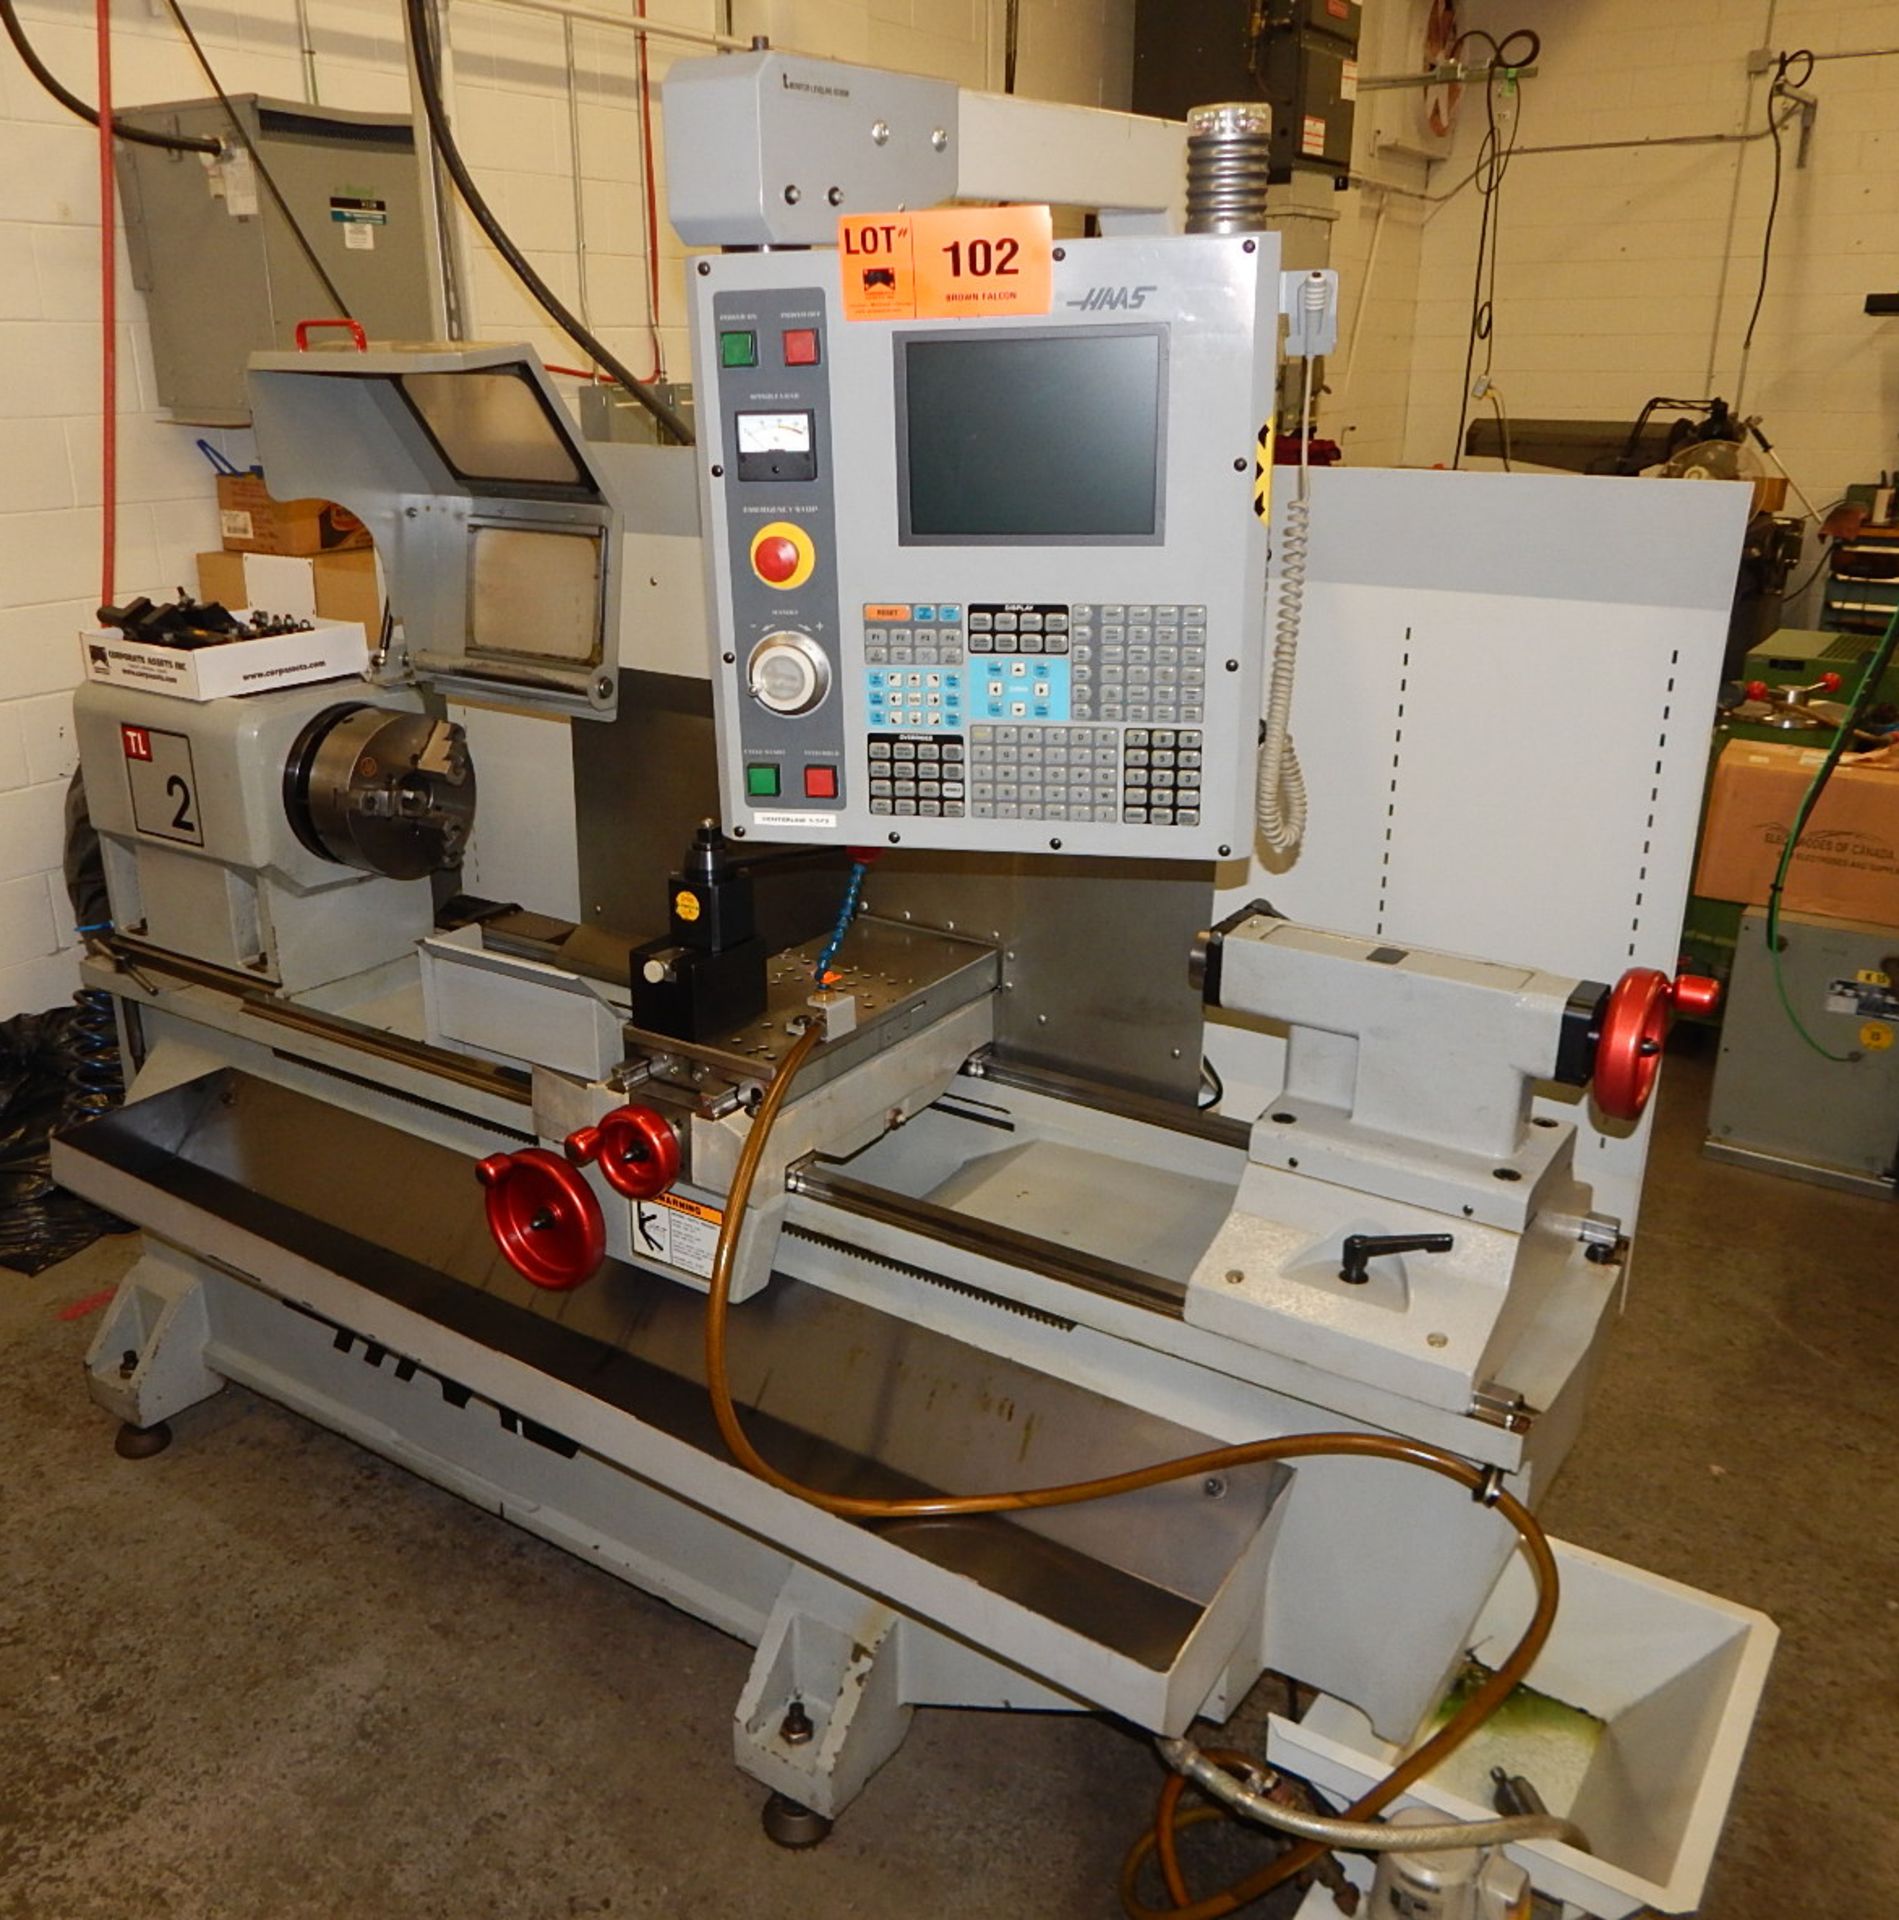 HAAS (02/2005) TR2 CNC LATHE WITH HAAS CNC CONTROL, 28" SWING, 52" BETWEEN CENTERS, 2.75" SPINDLE - Image 2 of 7